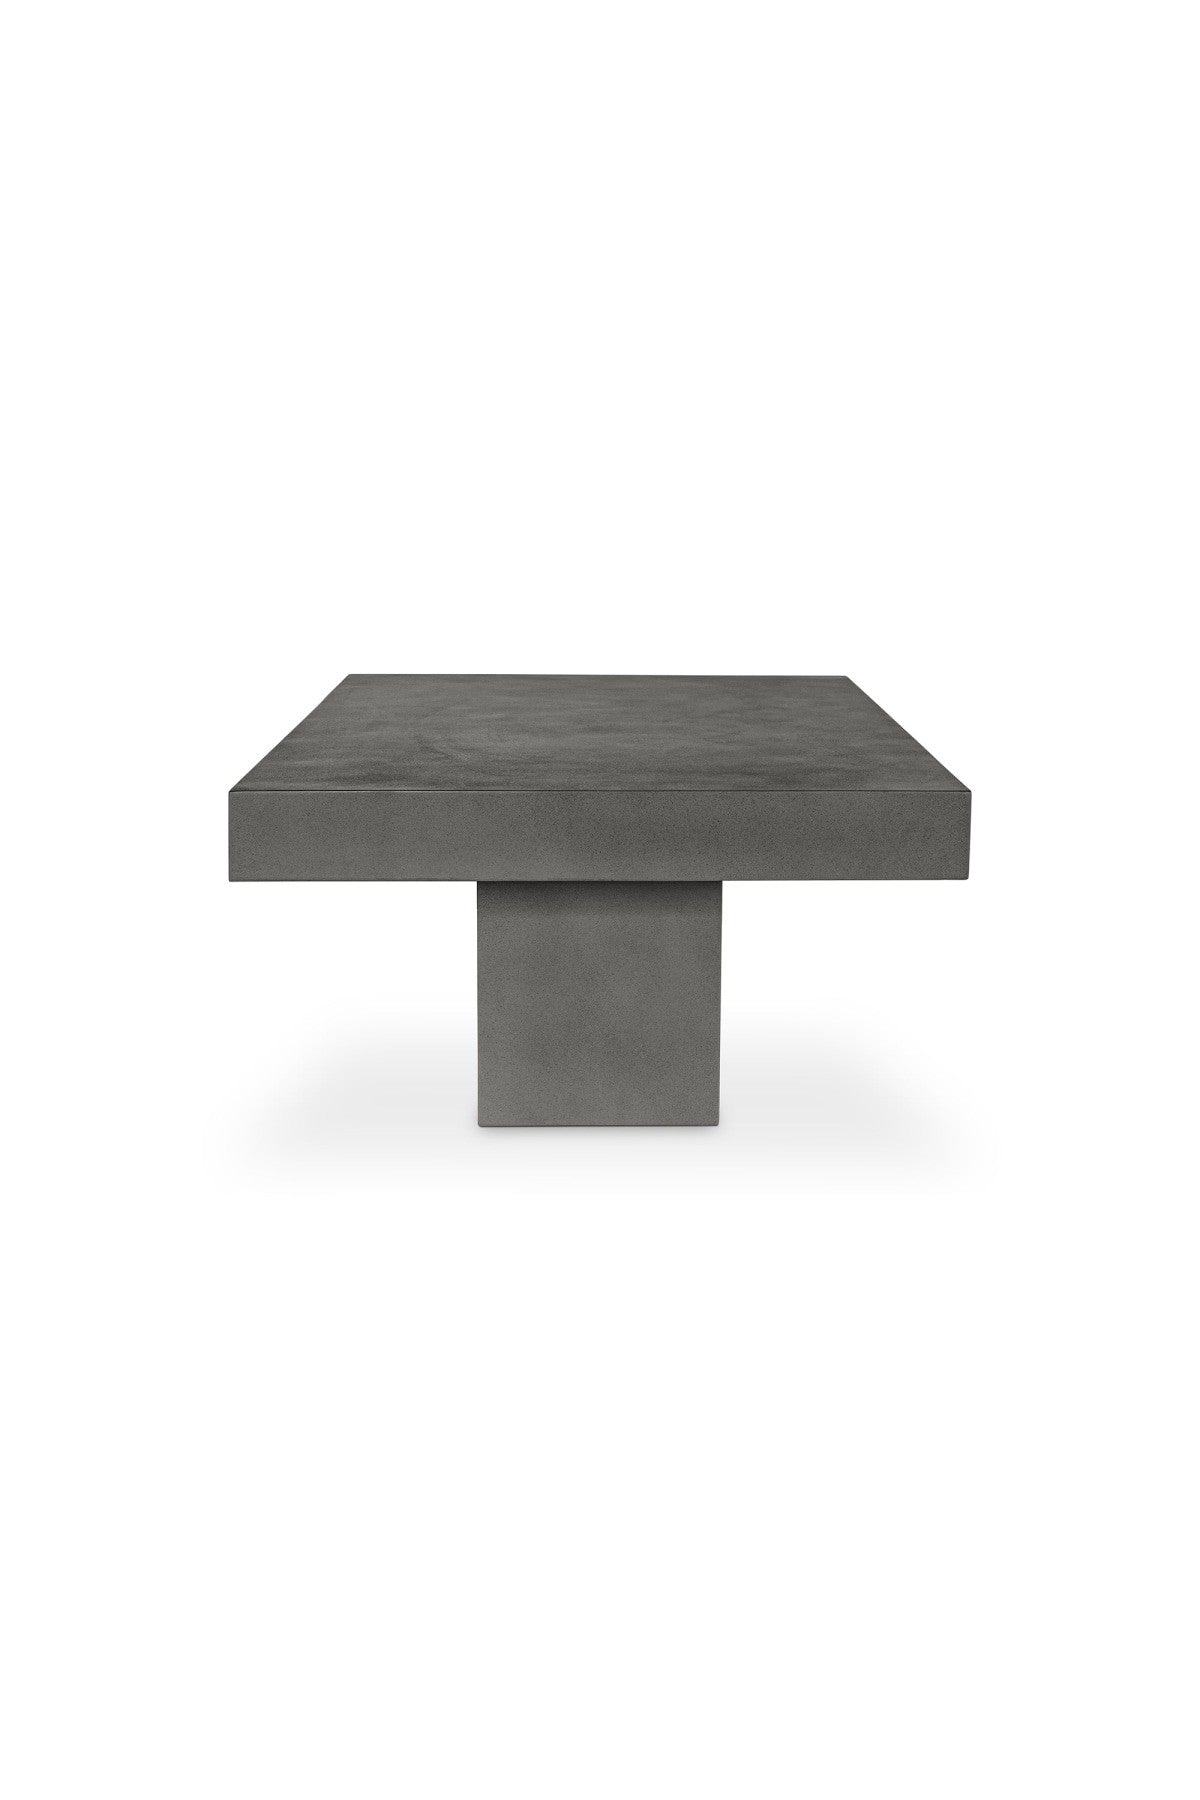 Emblem Outdoor Coffee Table